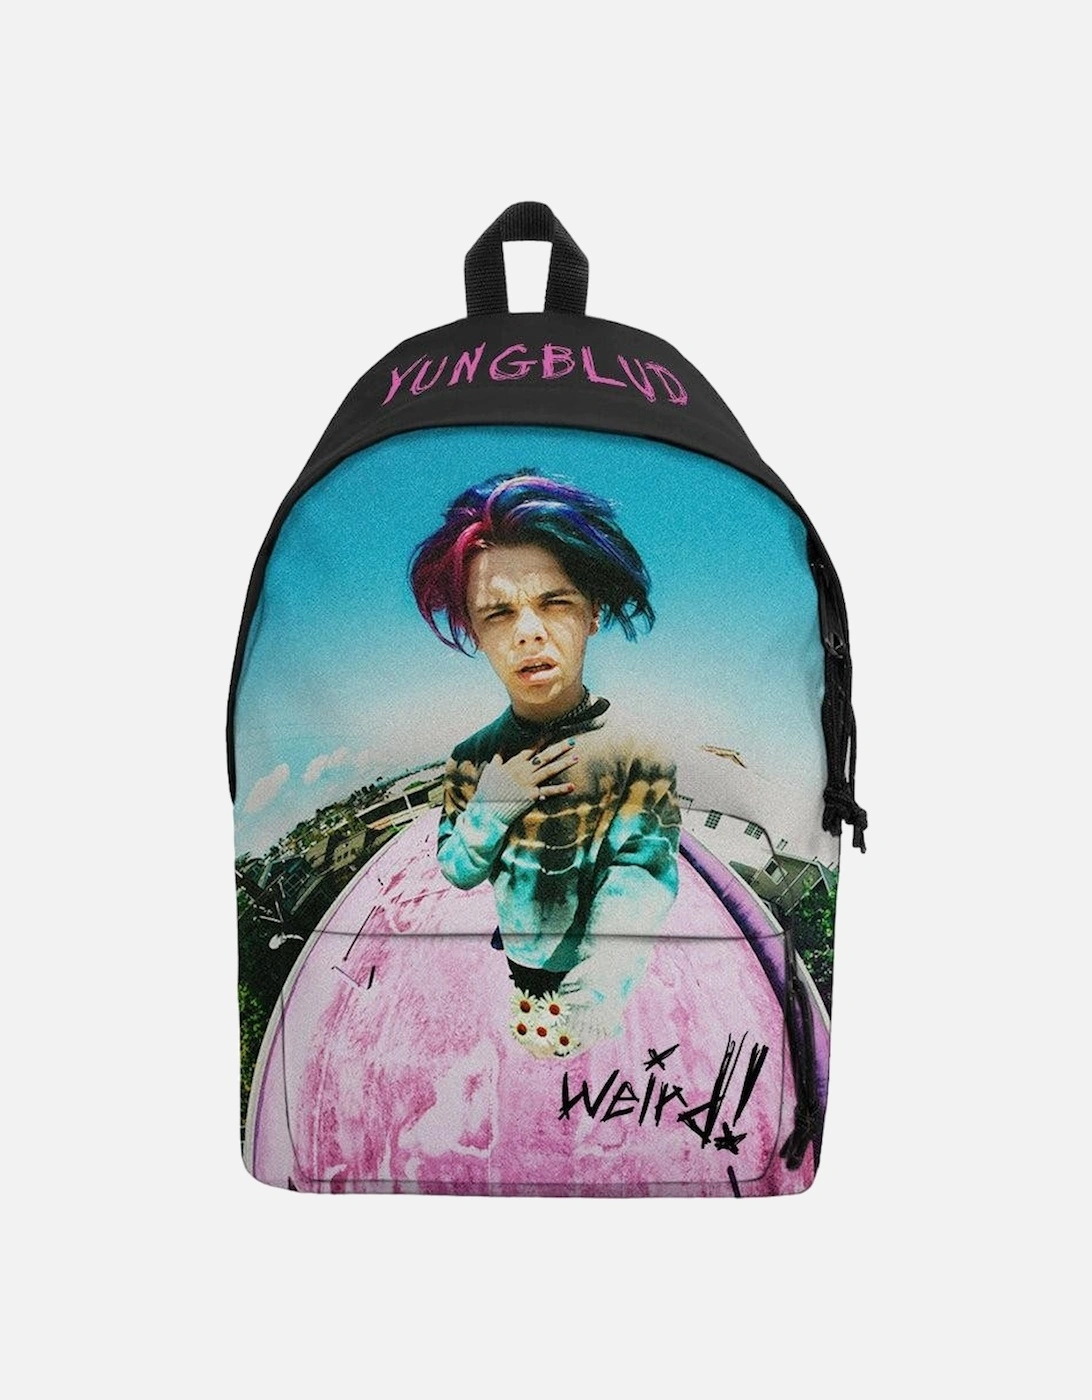 Weird! Yungblud Backpack, 2 of 1